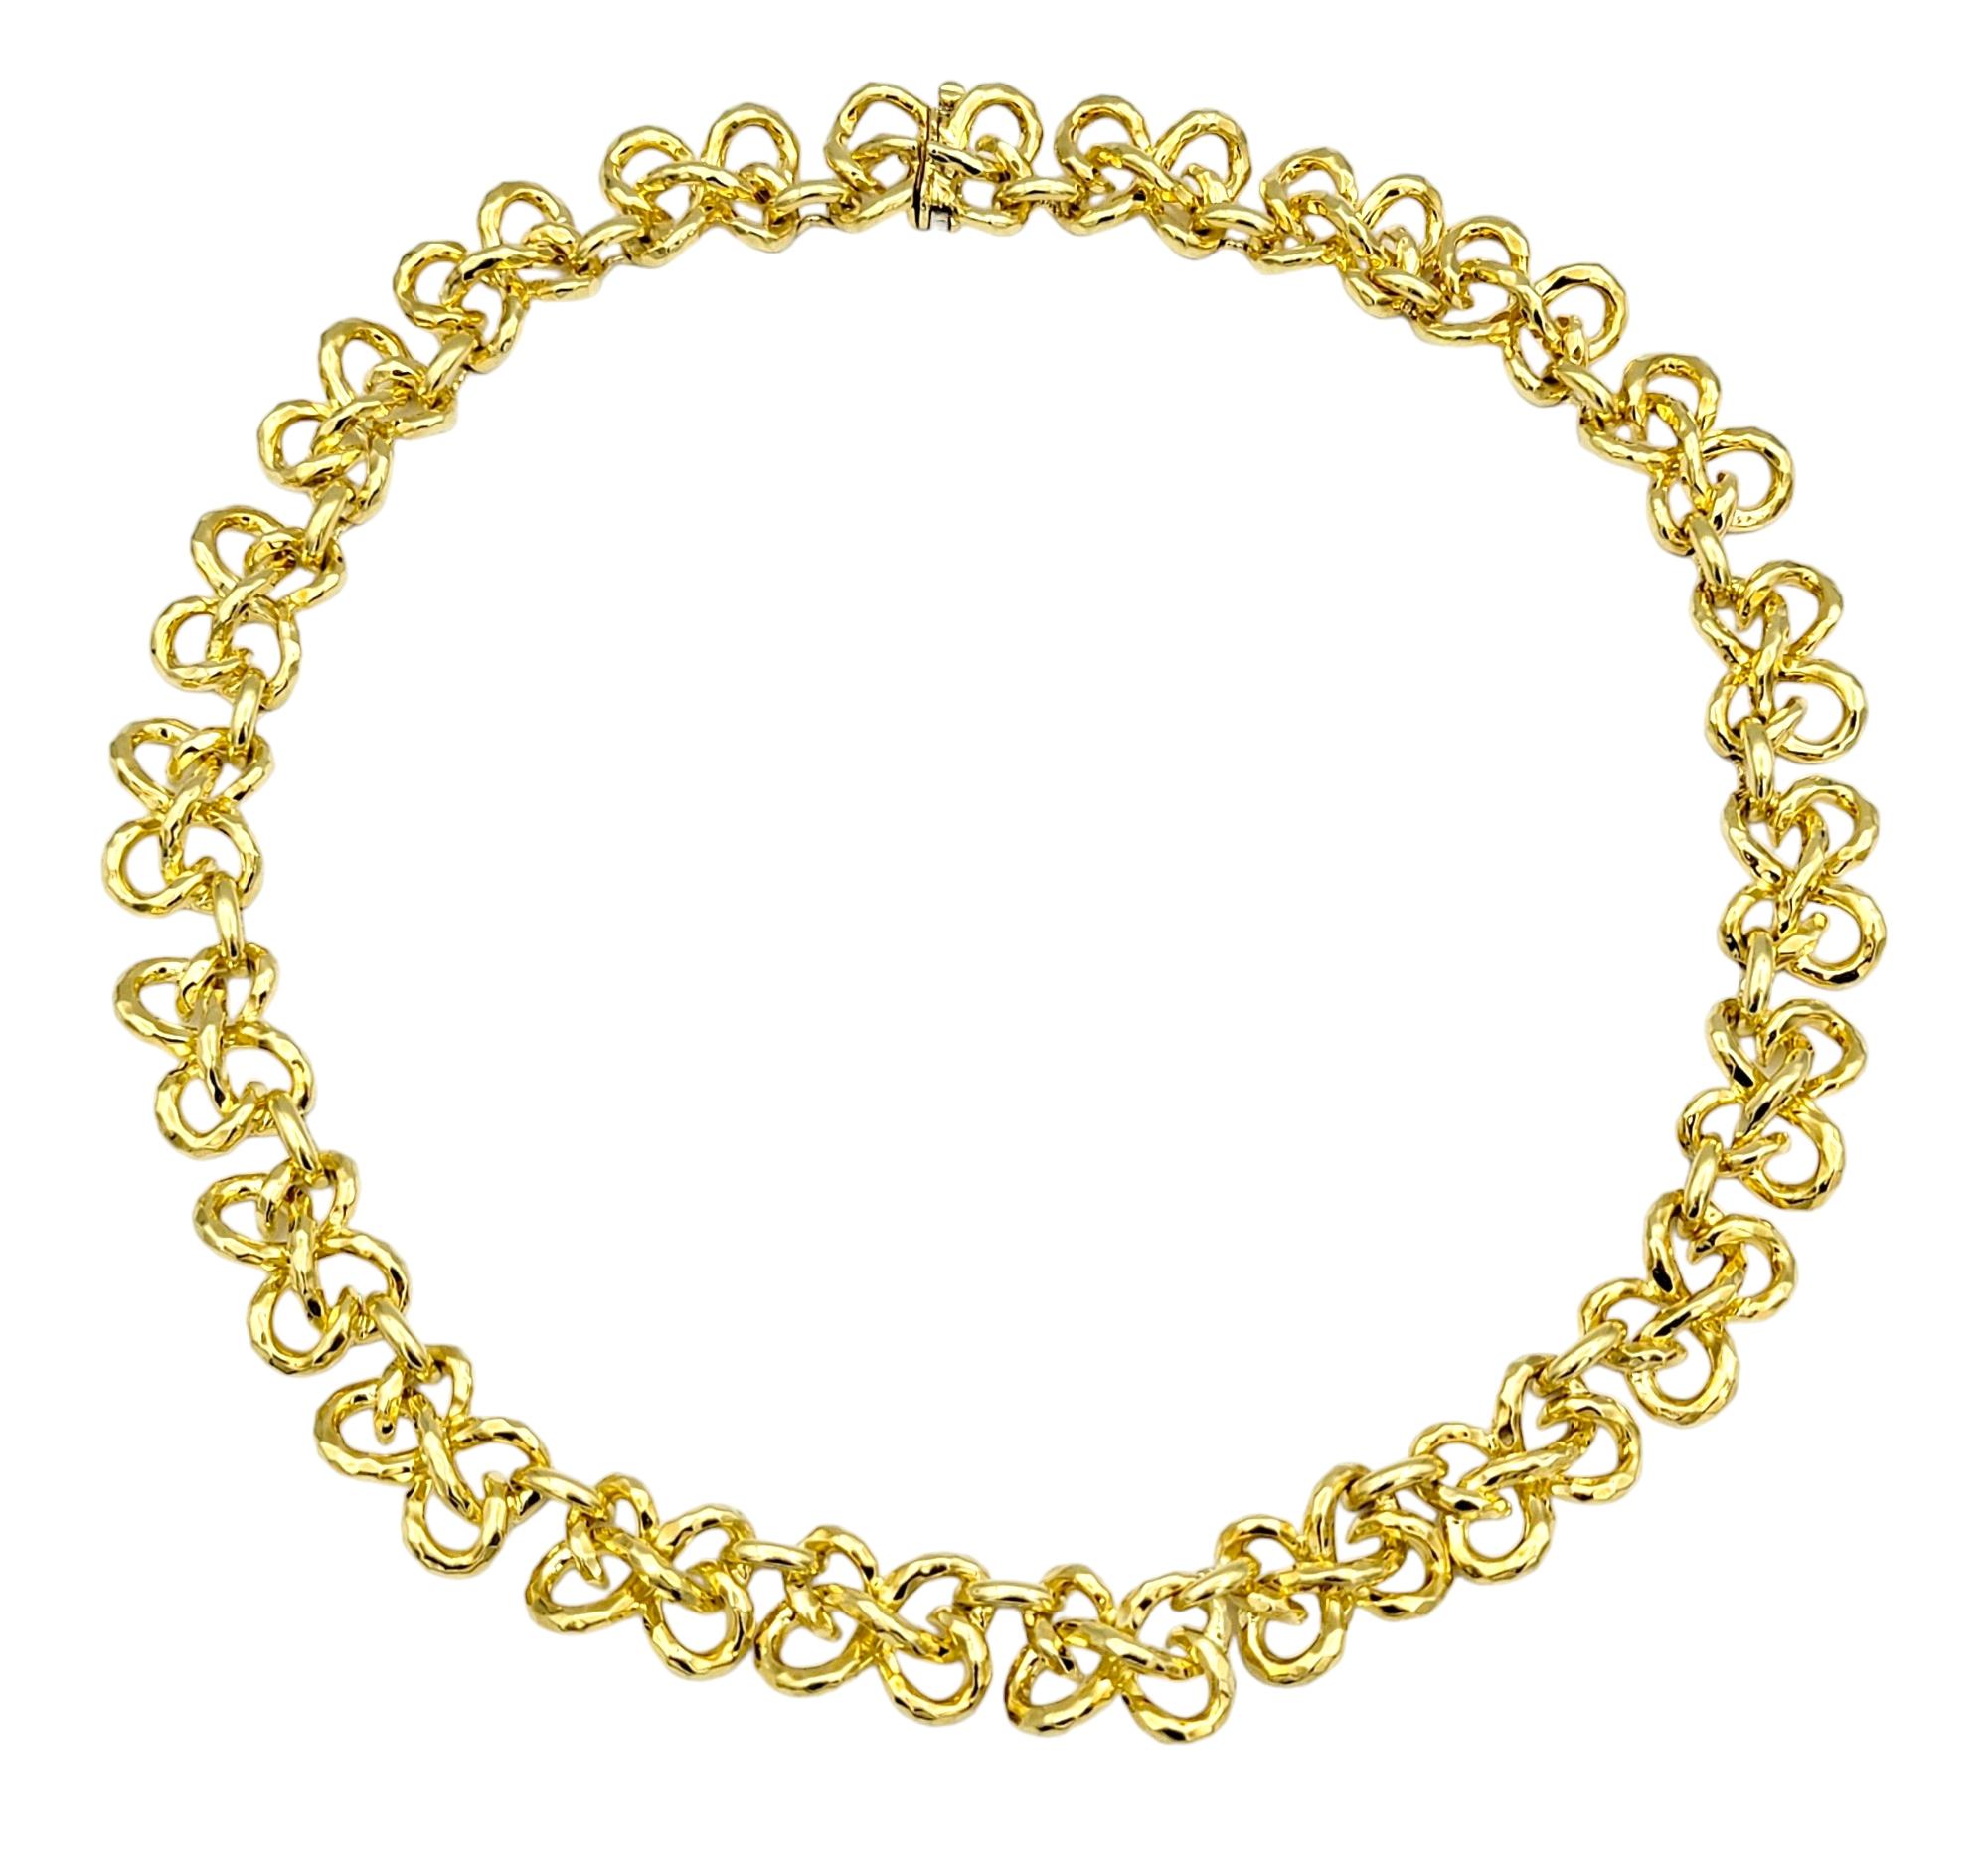 Crafted with exquisite artistry, this Henry Dunay collar necklace showcases a mesmerizing twisted design, reminiscent of delicately intertwined ribbons. Meticulously fashioned from radiant 18 karat yellow gold, each twist of the gold ribbon links